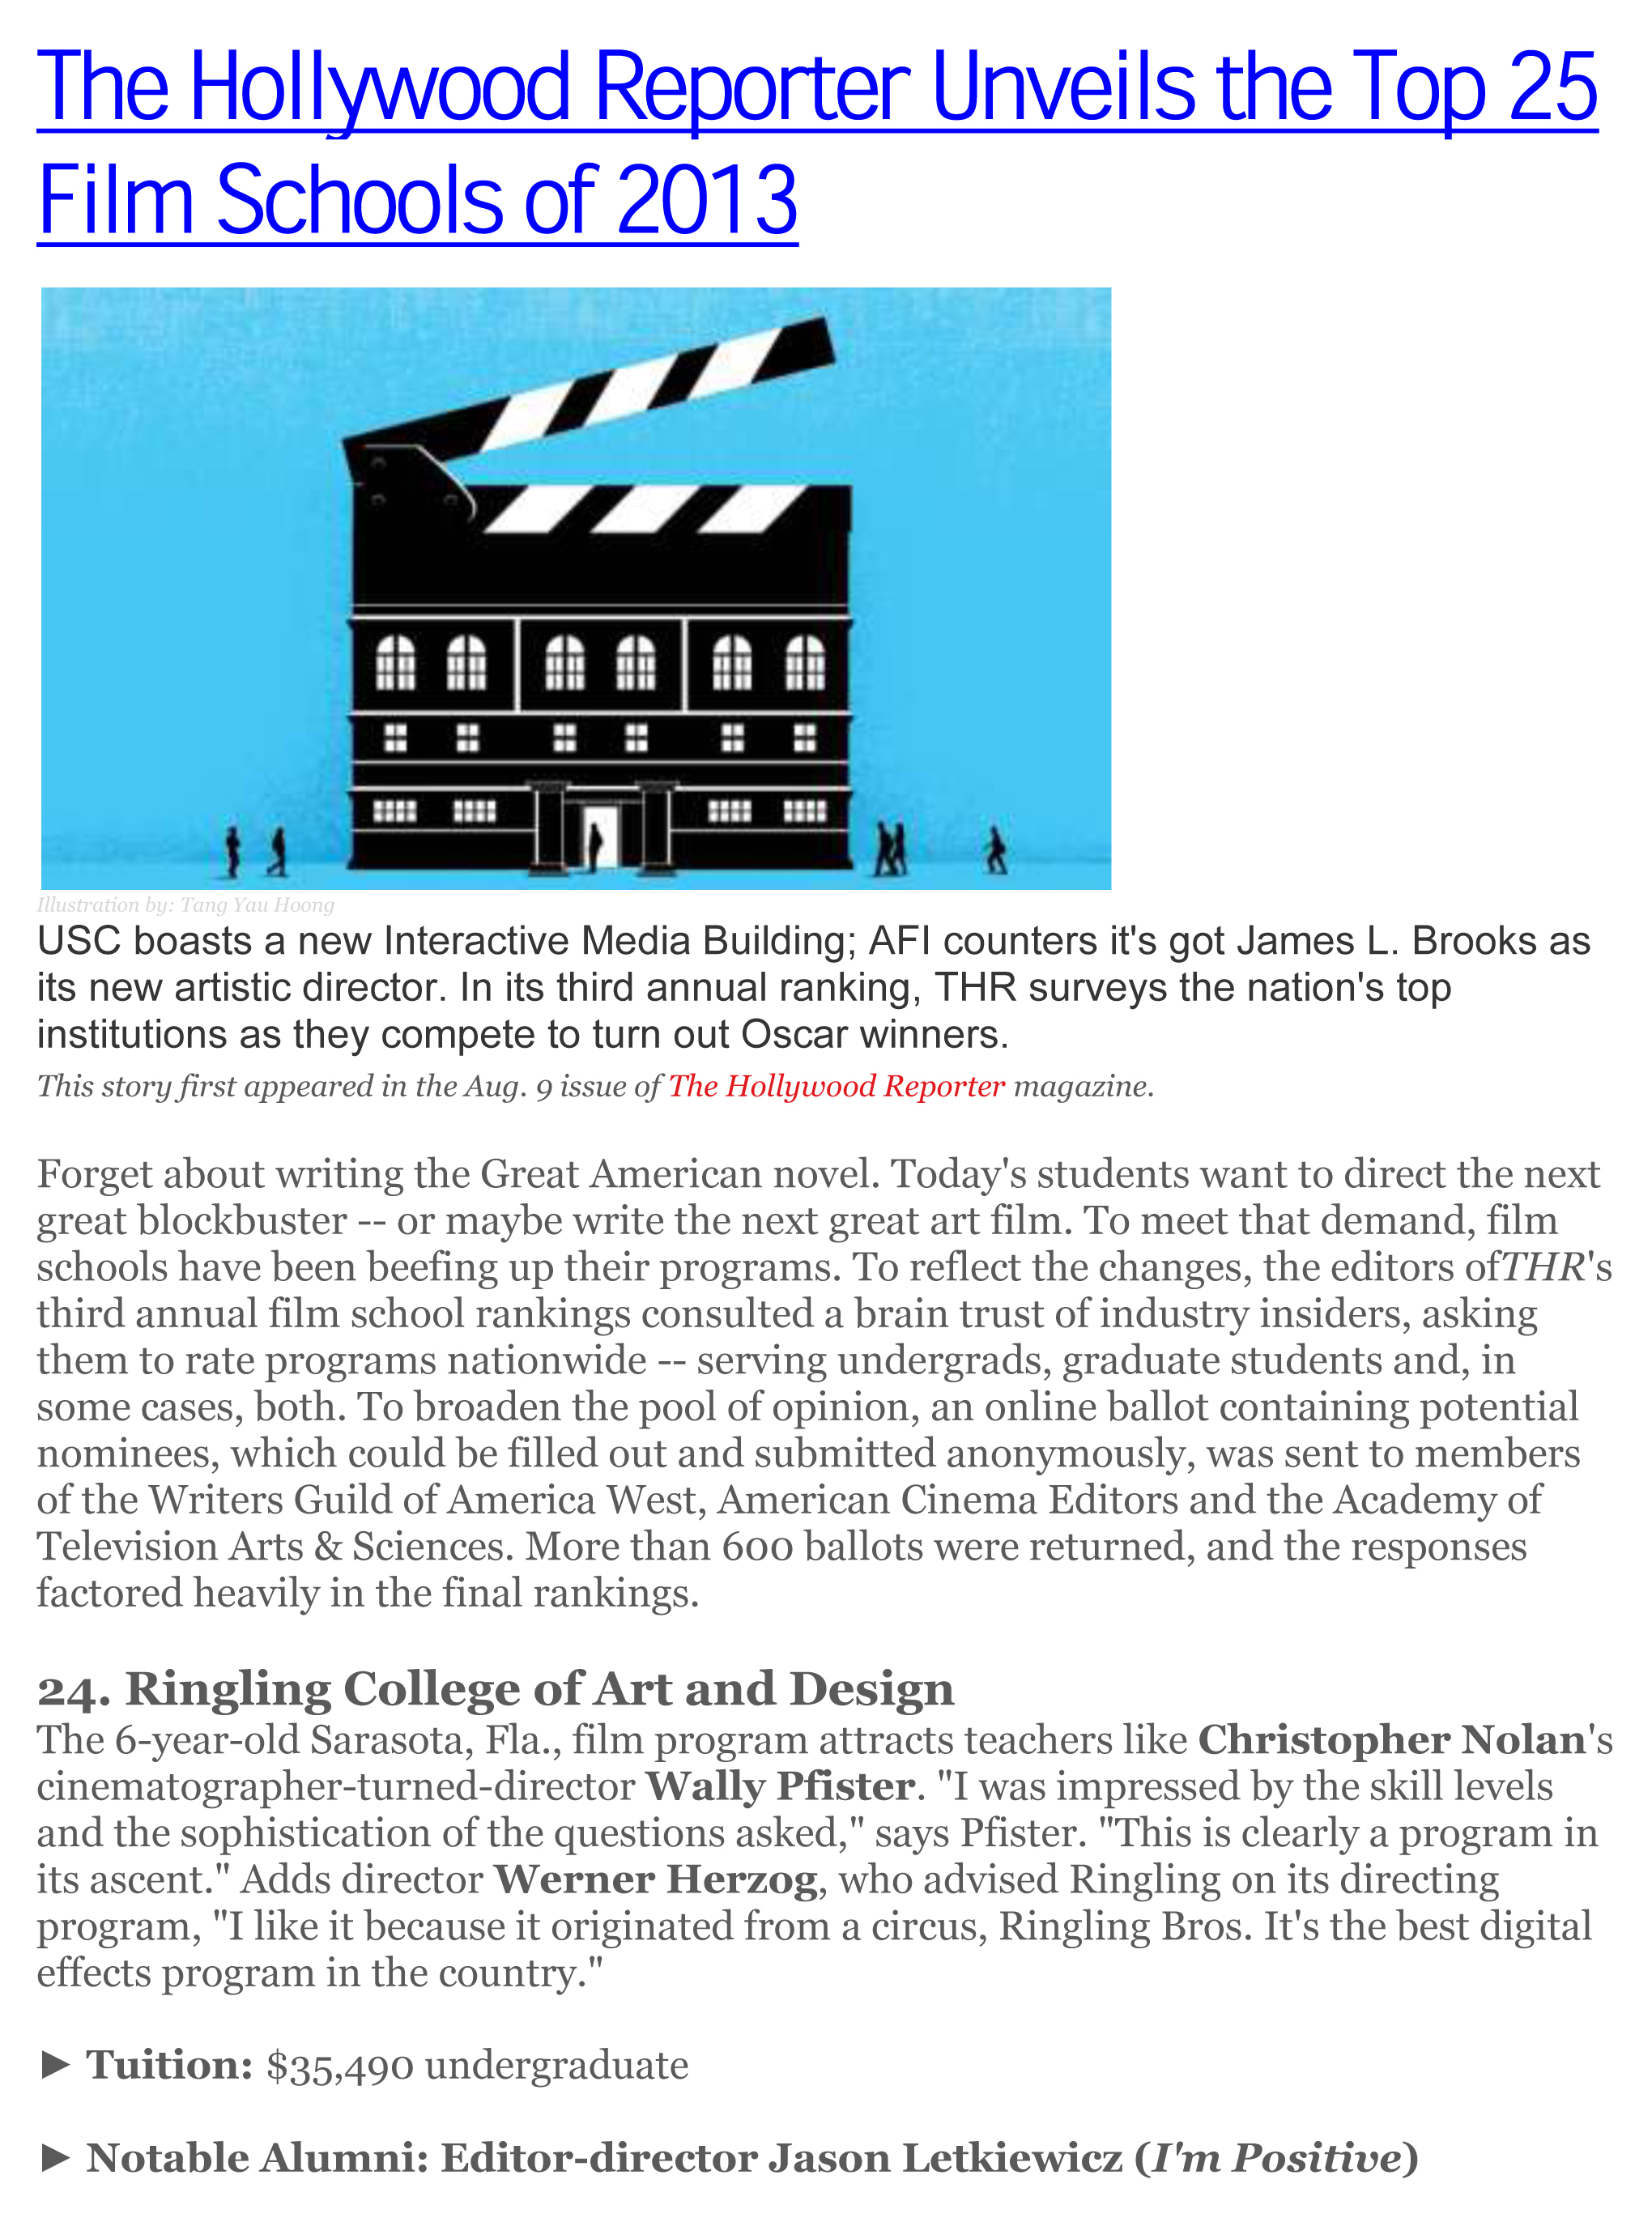 Excerpt of The Hollywood Reporter Top 25 Films Schools article